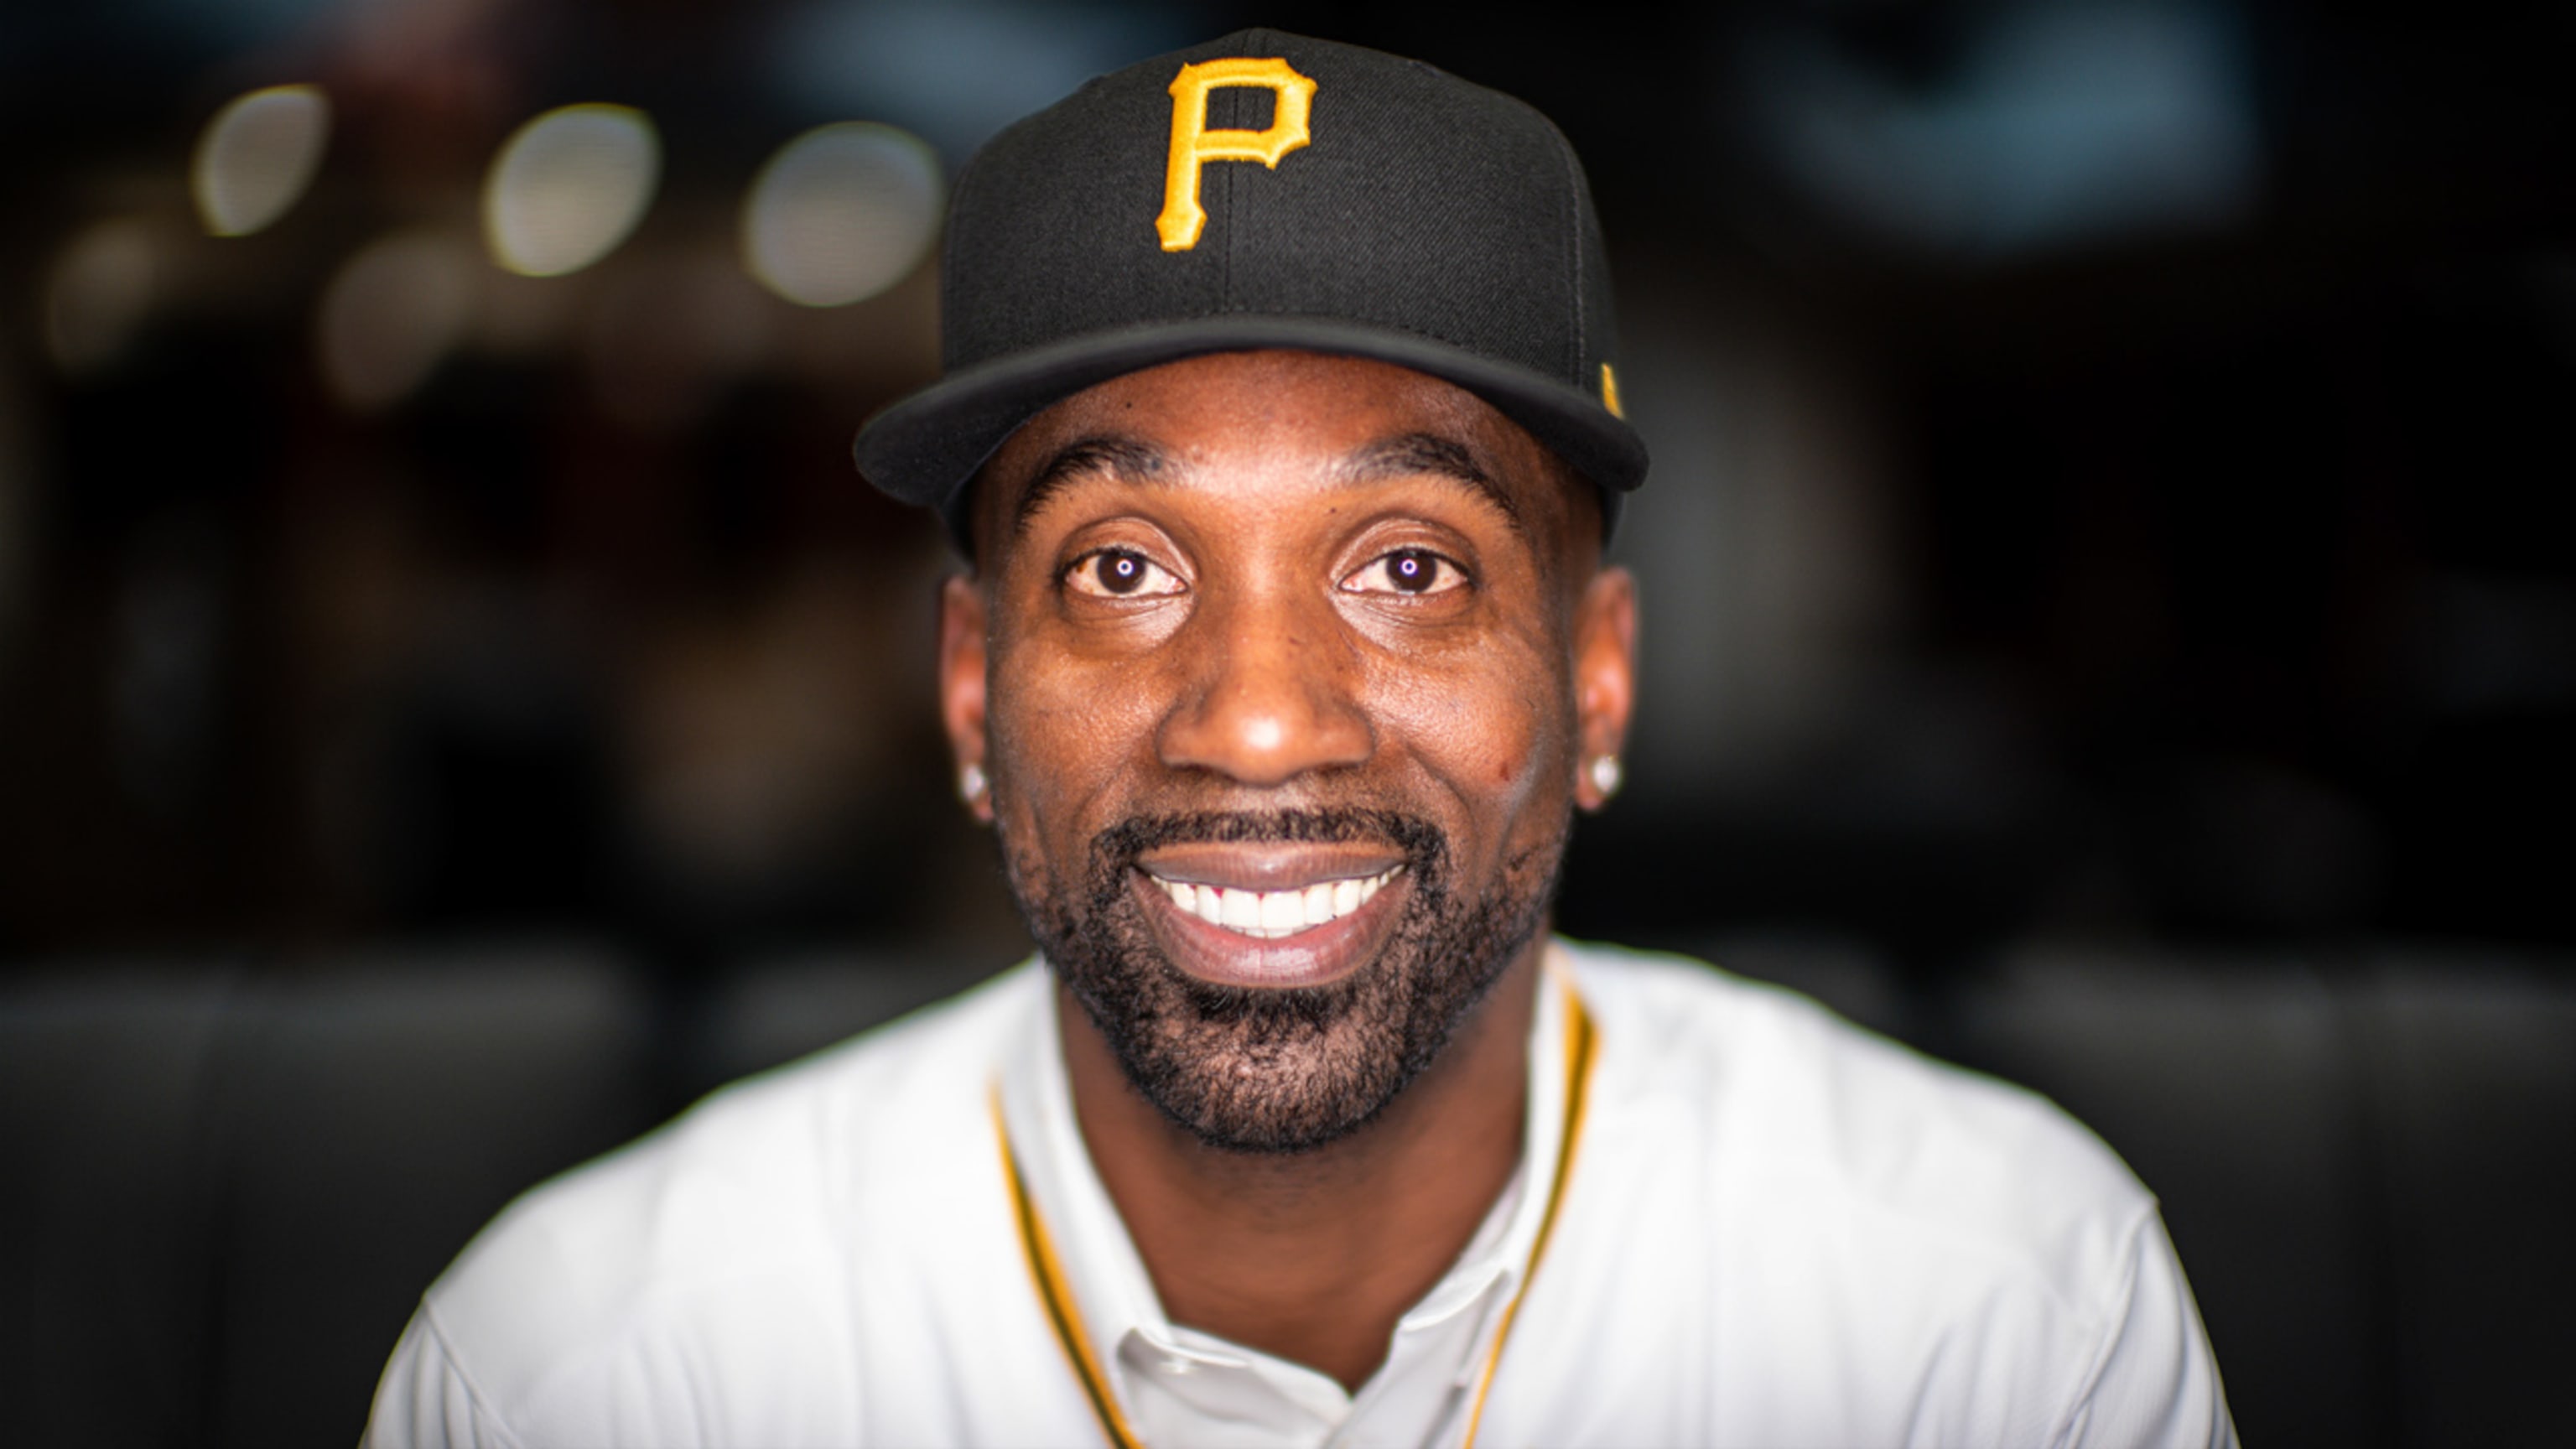 Andrew McCutchen at first base? Here's why the Pirates should make radical  move